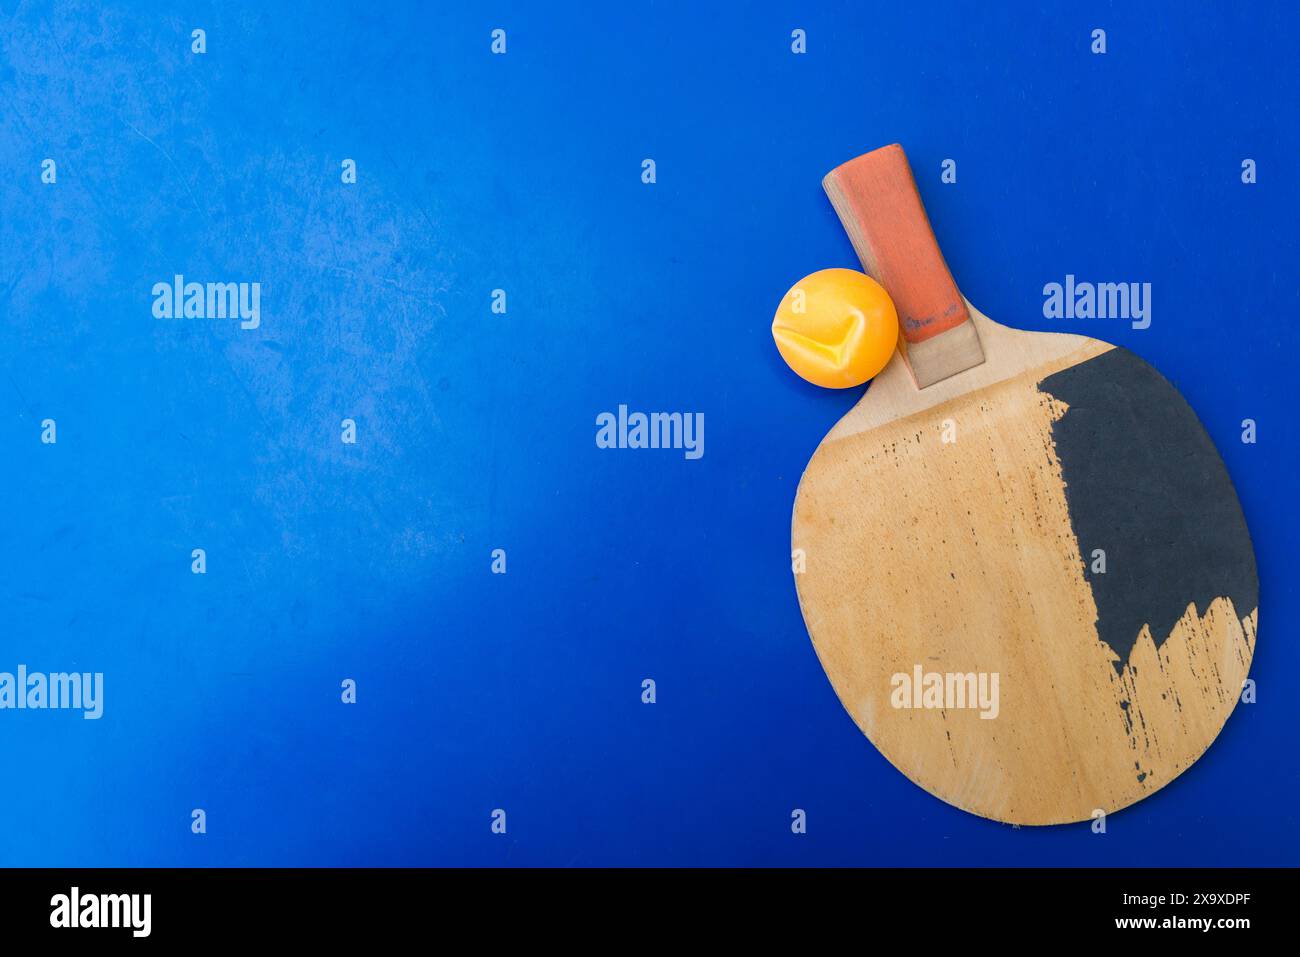 old pingpong rackets and a dented ball on a blue pingpong table Stock Photo